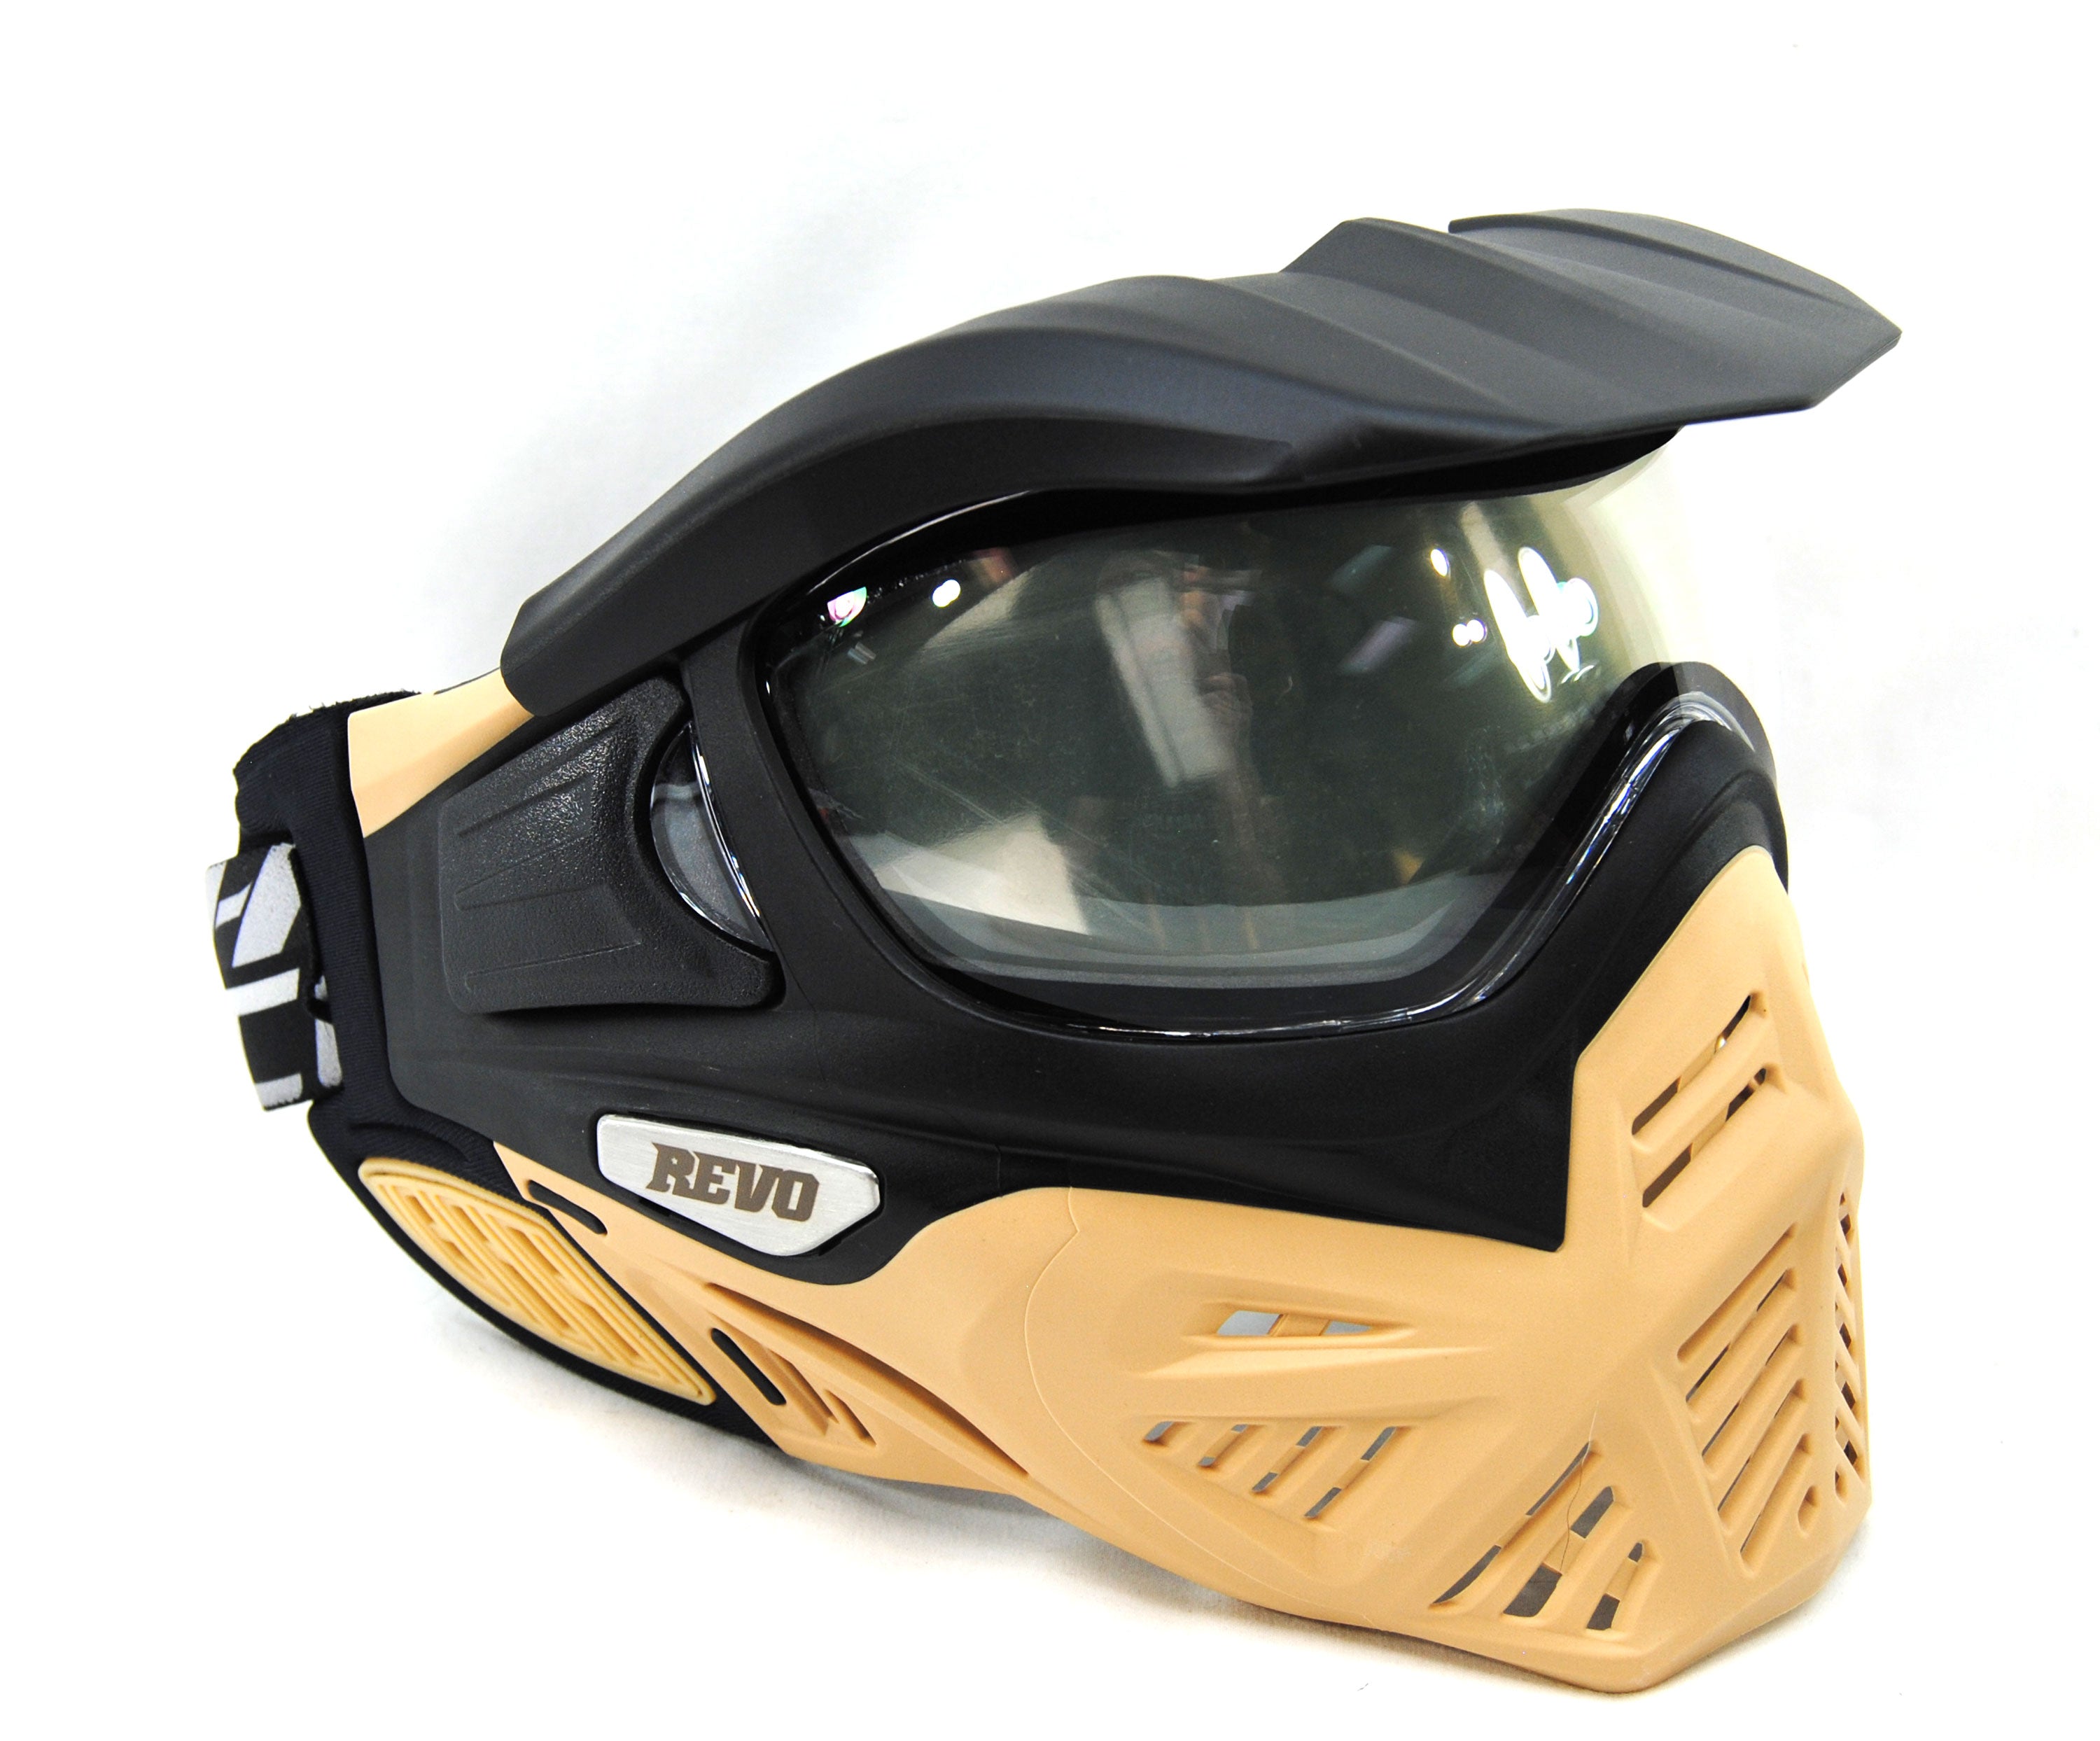 V-Force Grill 2.0 LE Pro Team REVO Paintball Mask Goggle - Tan/Black w